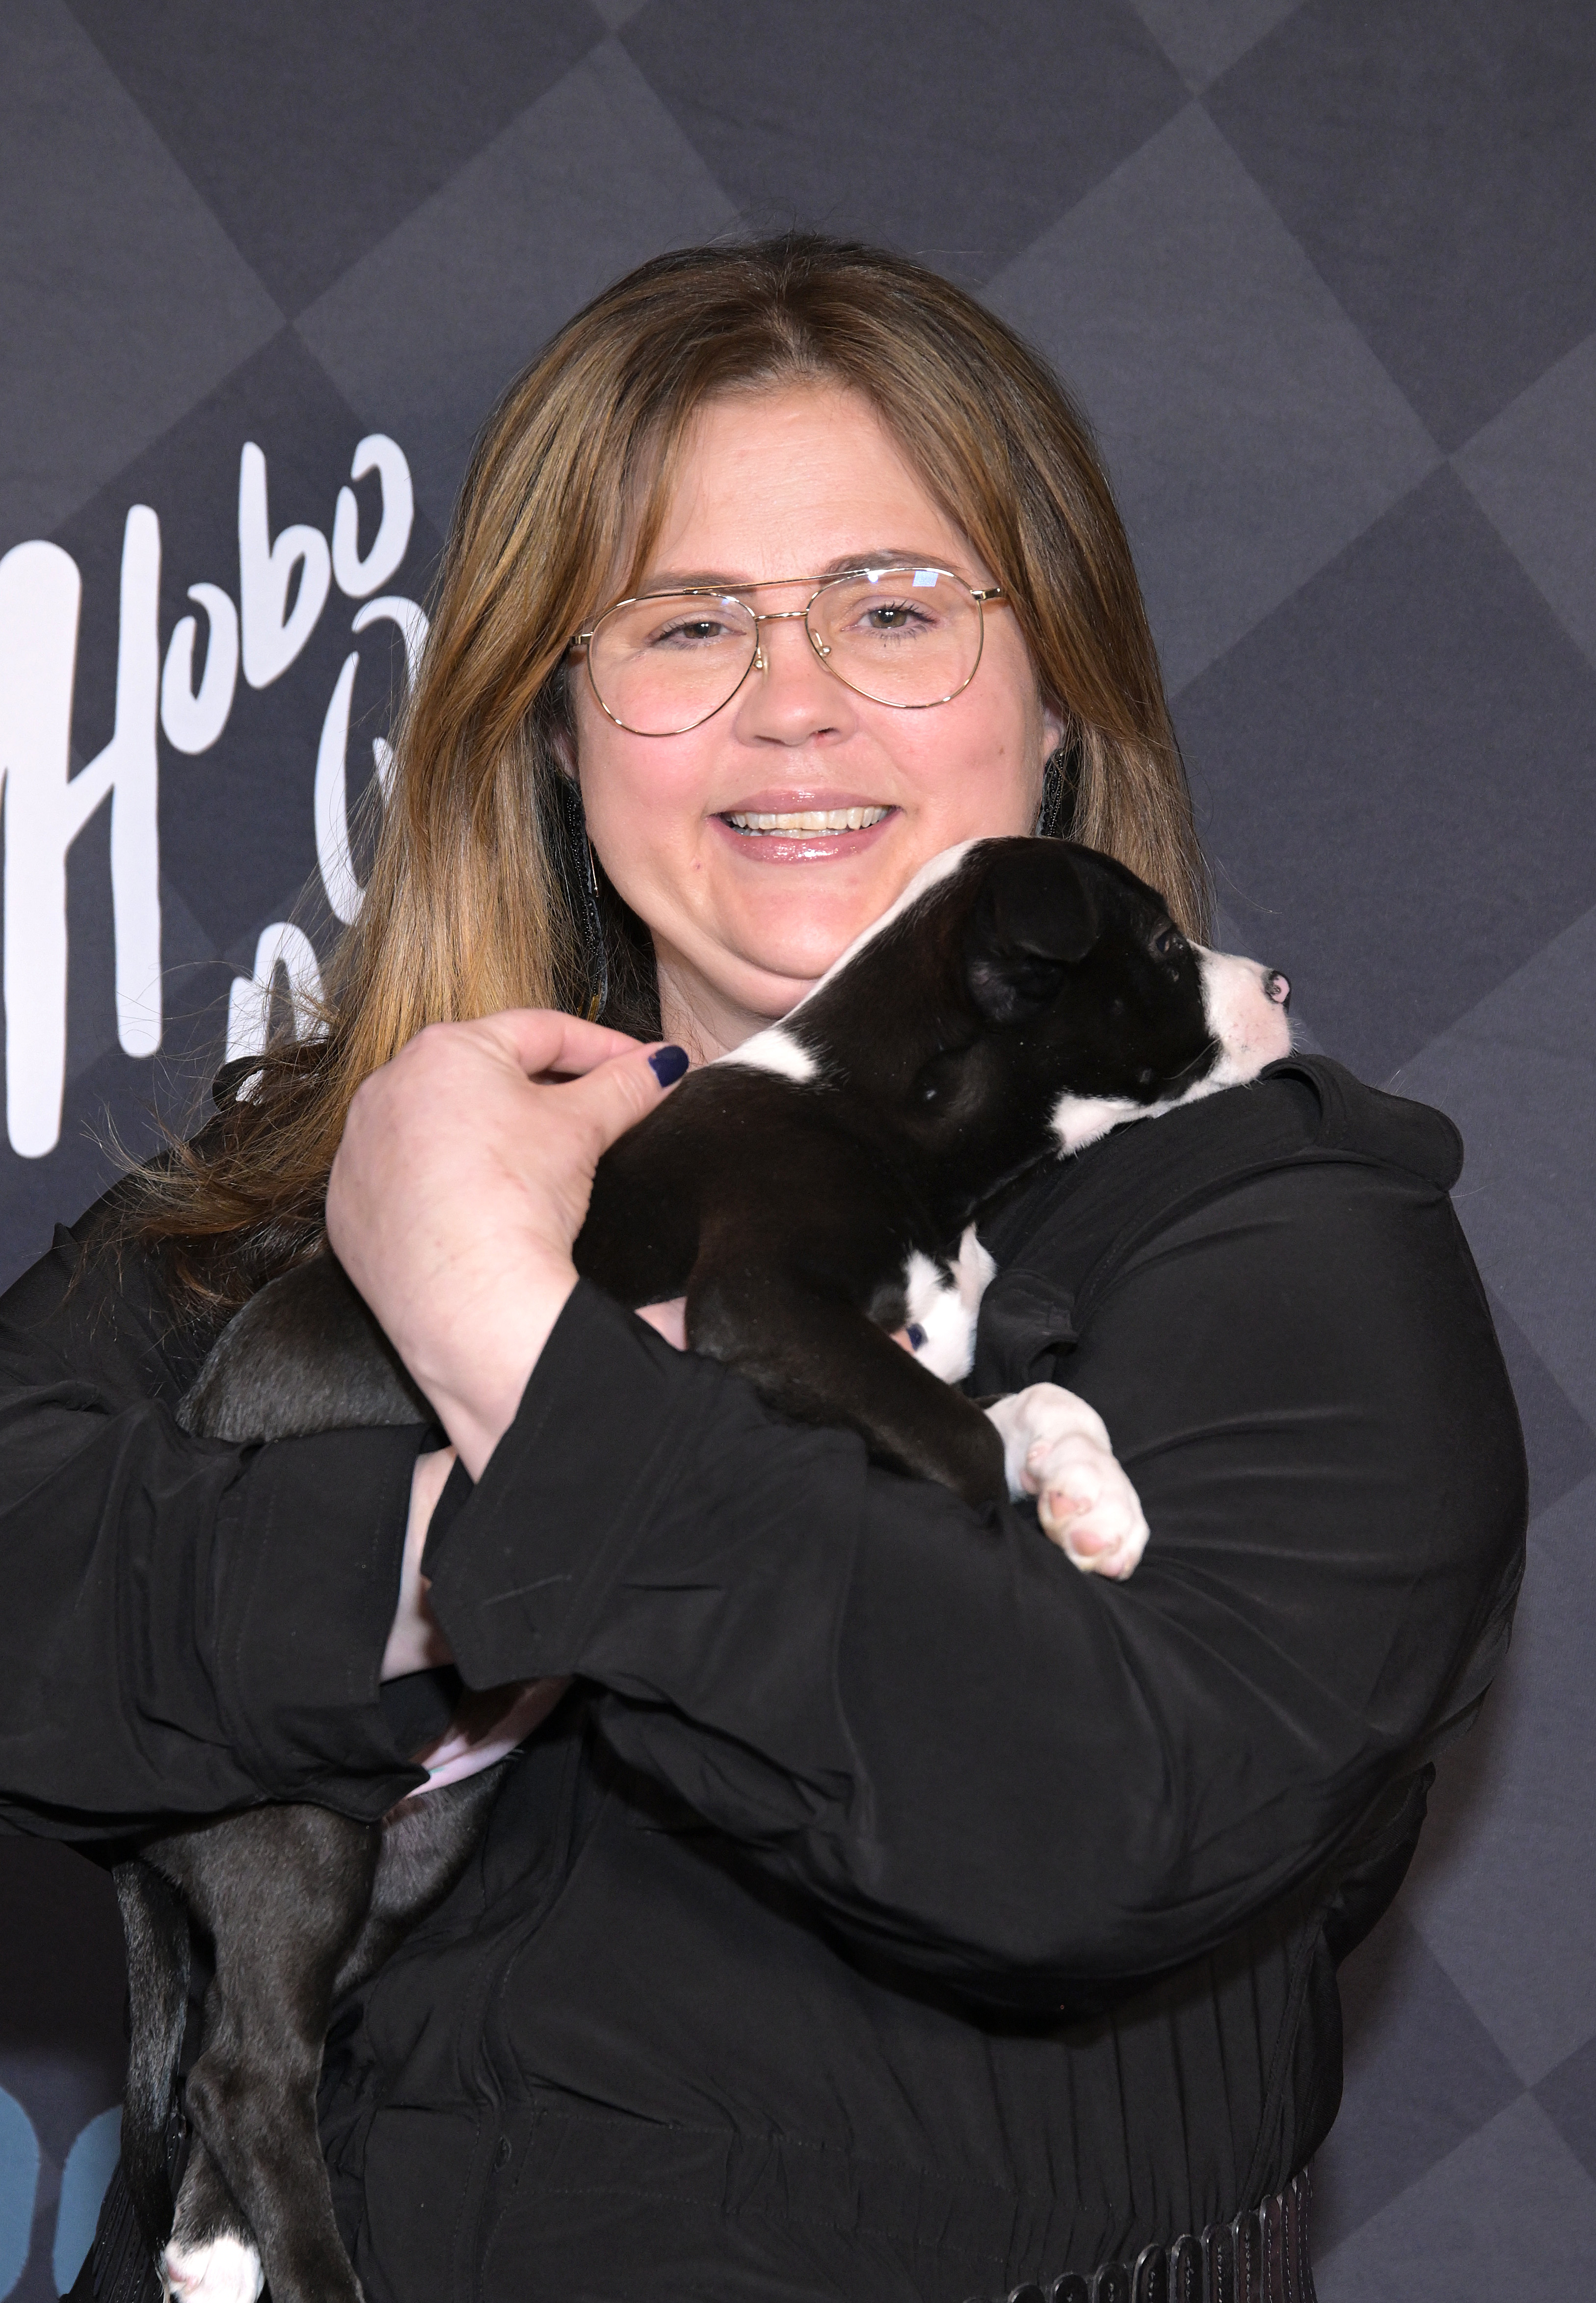 Close-up of Mandy smiling at a media event and holding a puppy